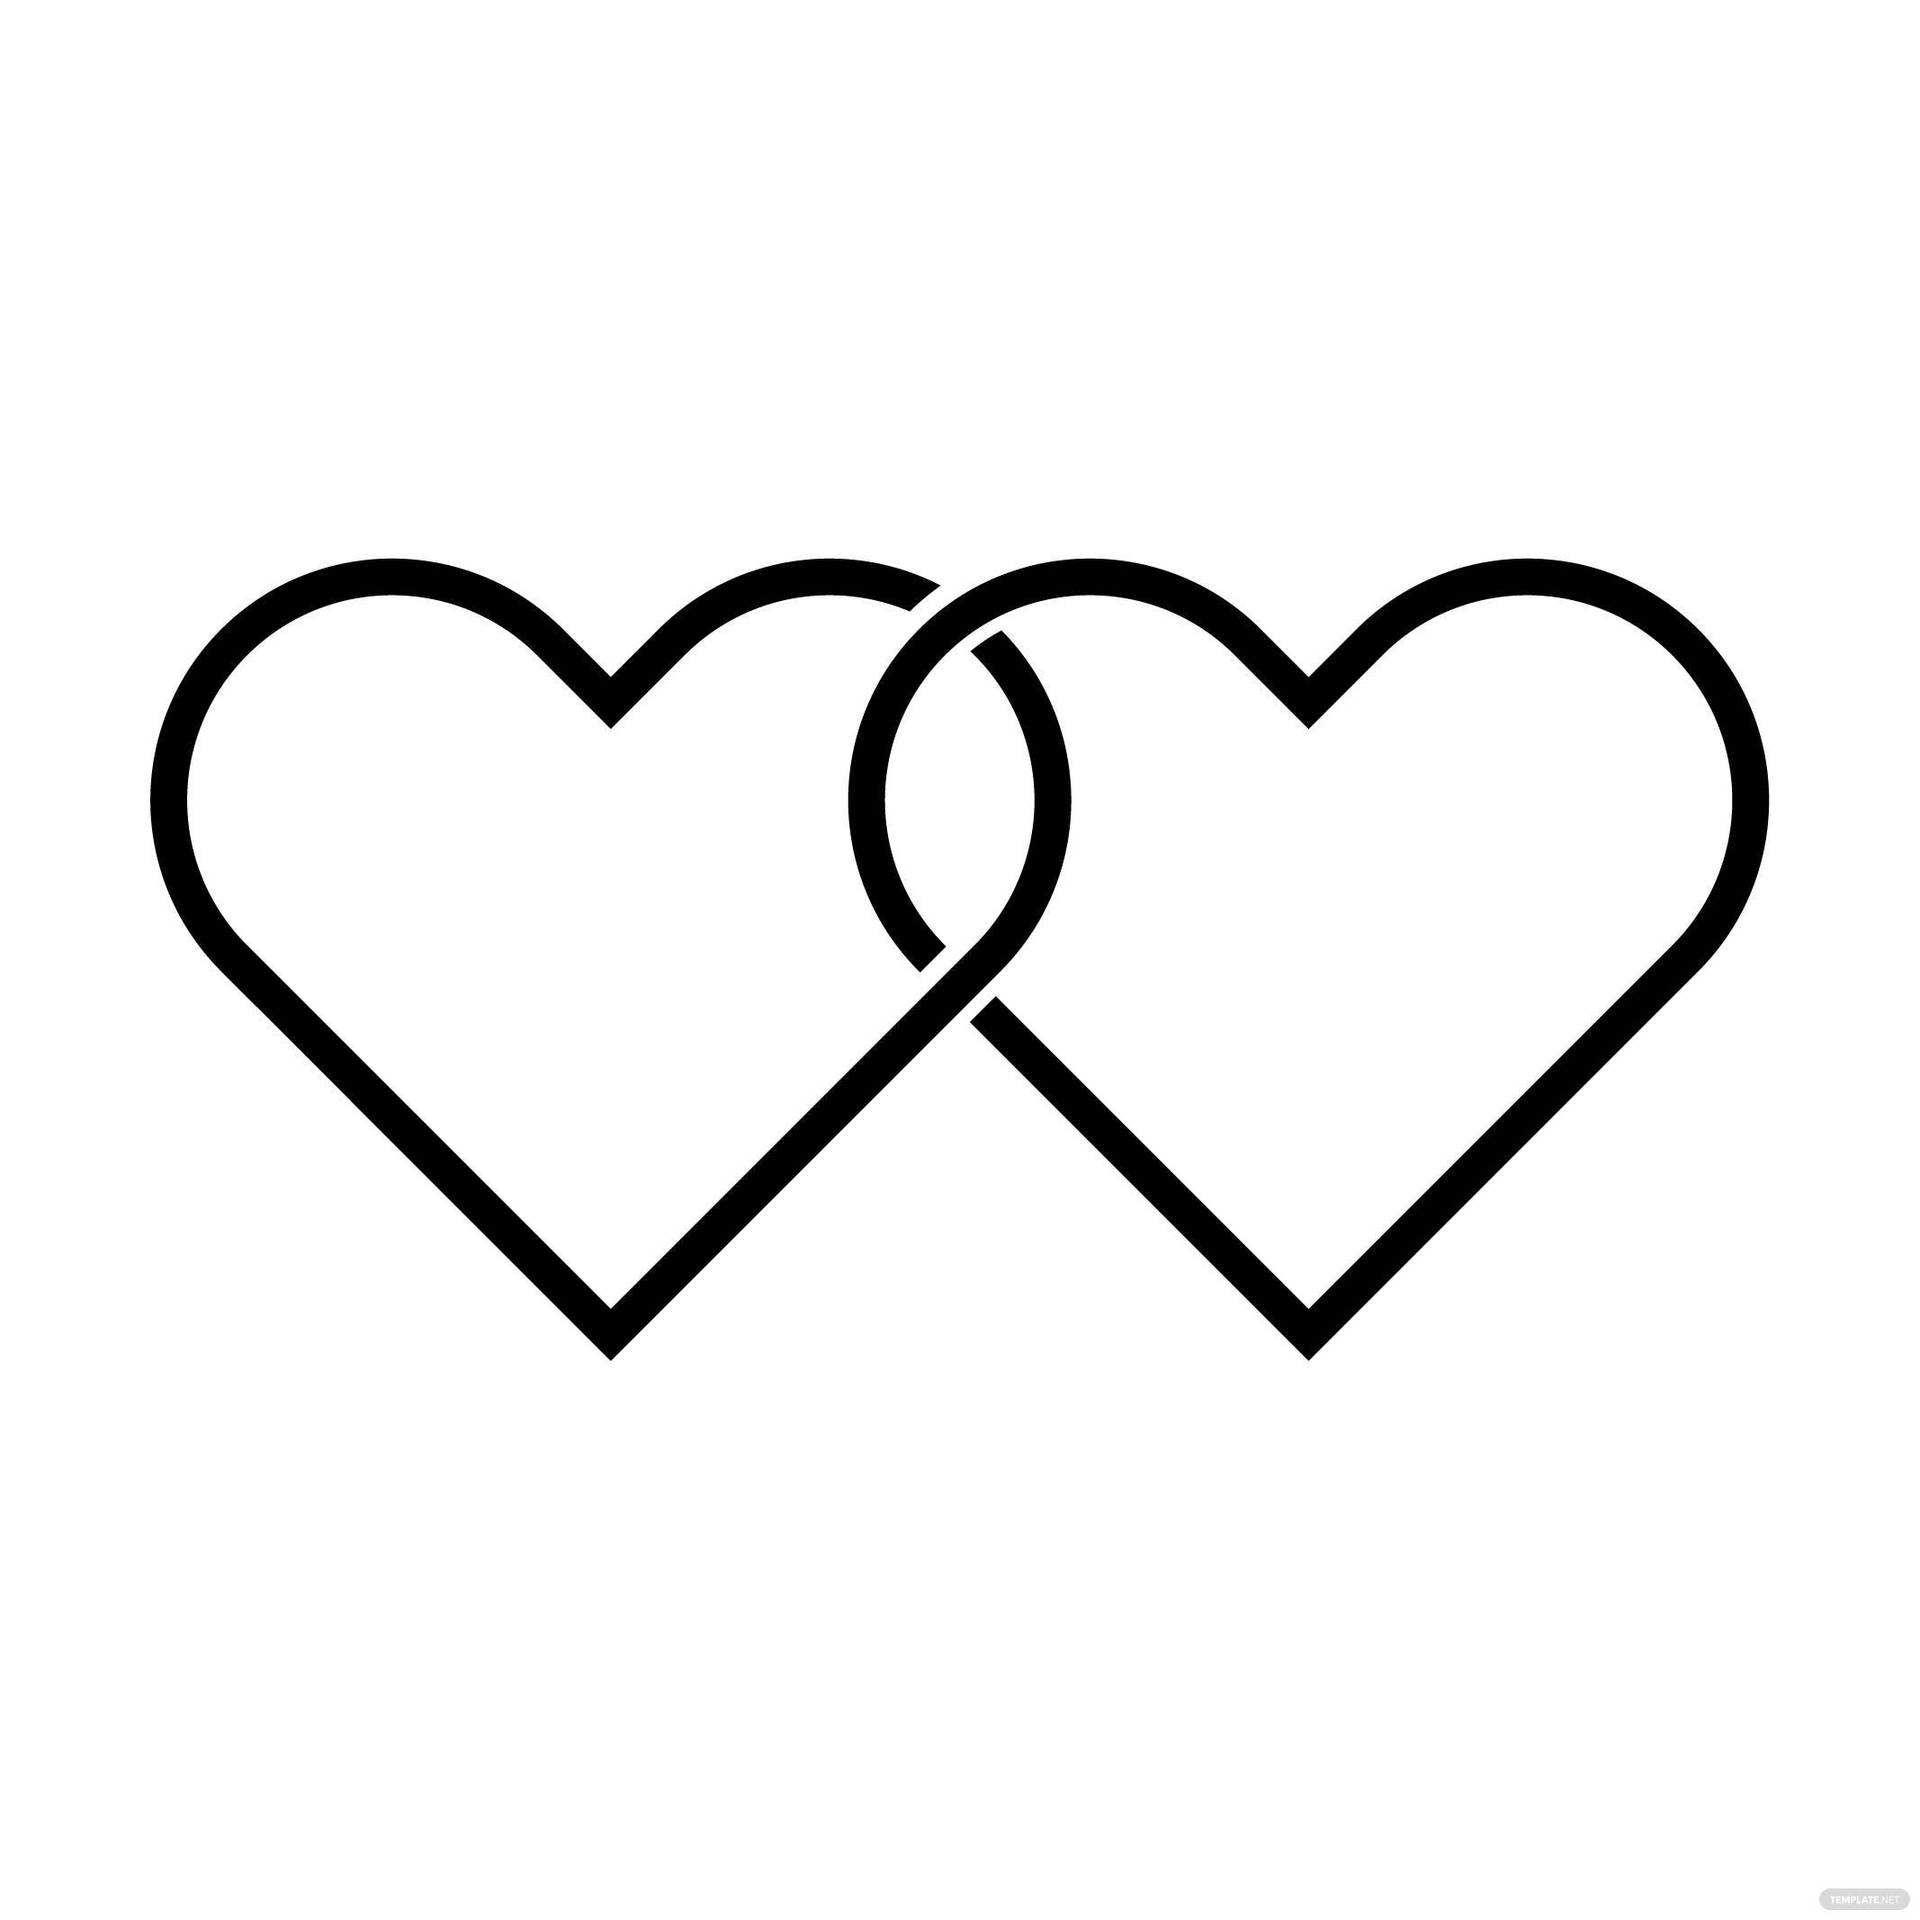 Two Connected White Hearts Background